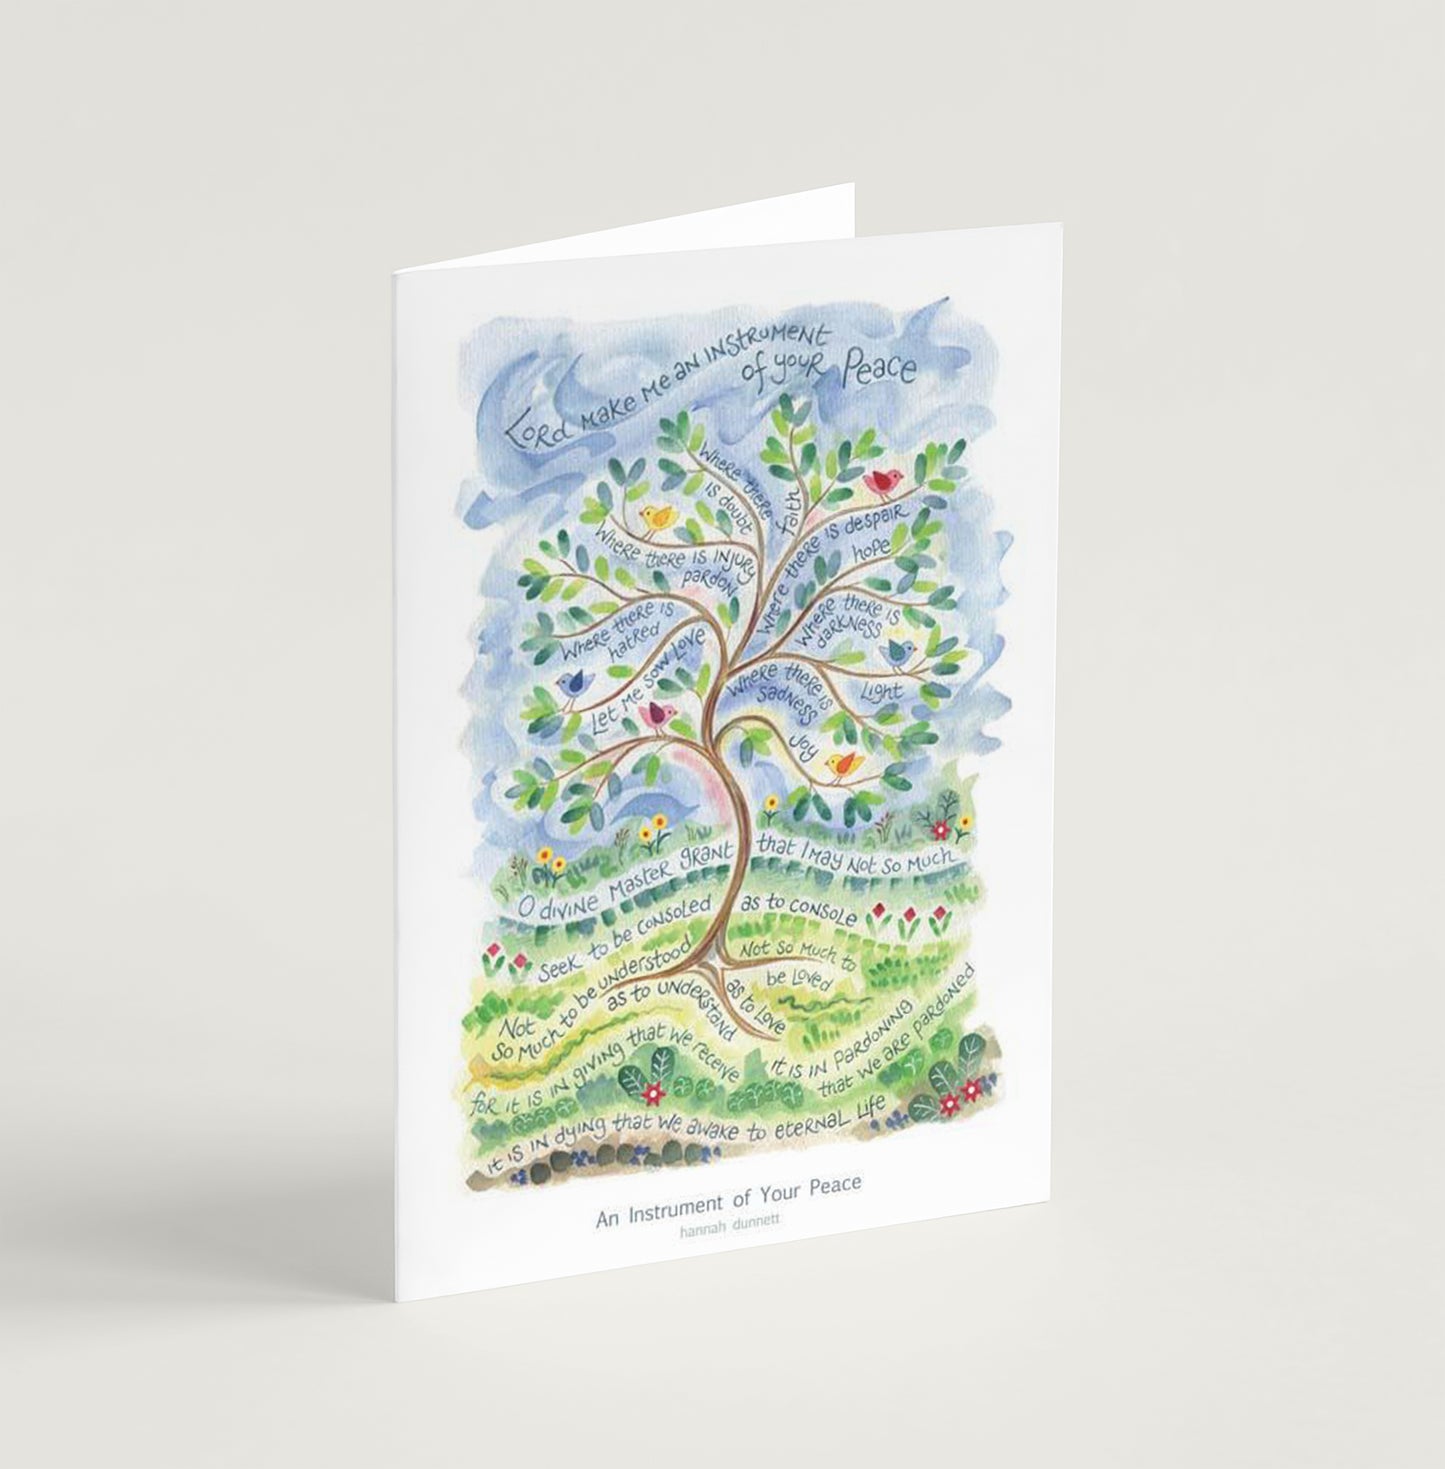 'An instrument of your peace' by Hannah Dunnett - Greeting Card